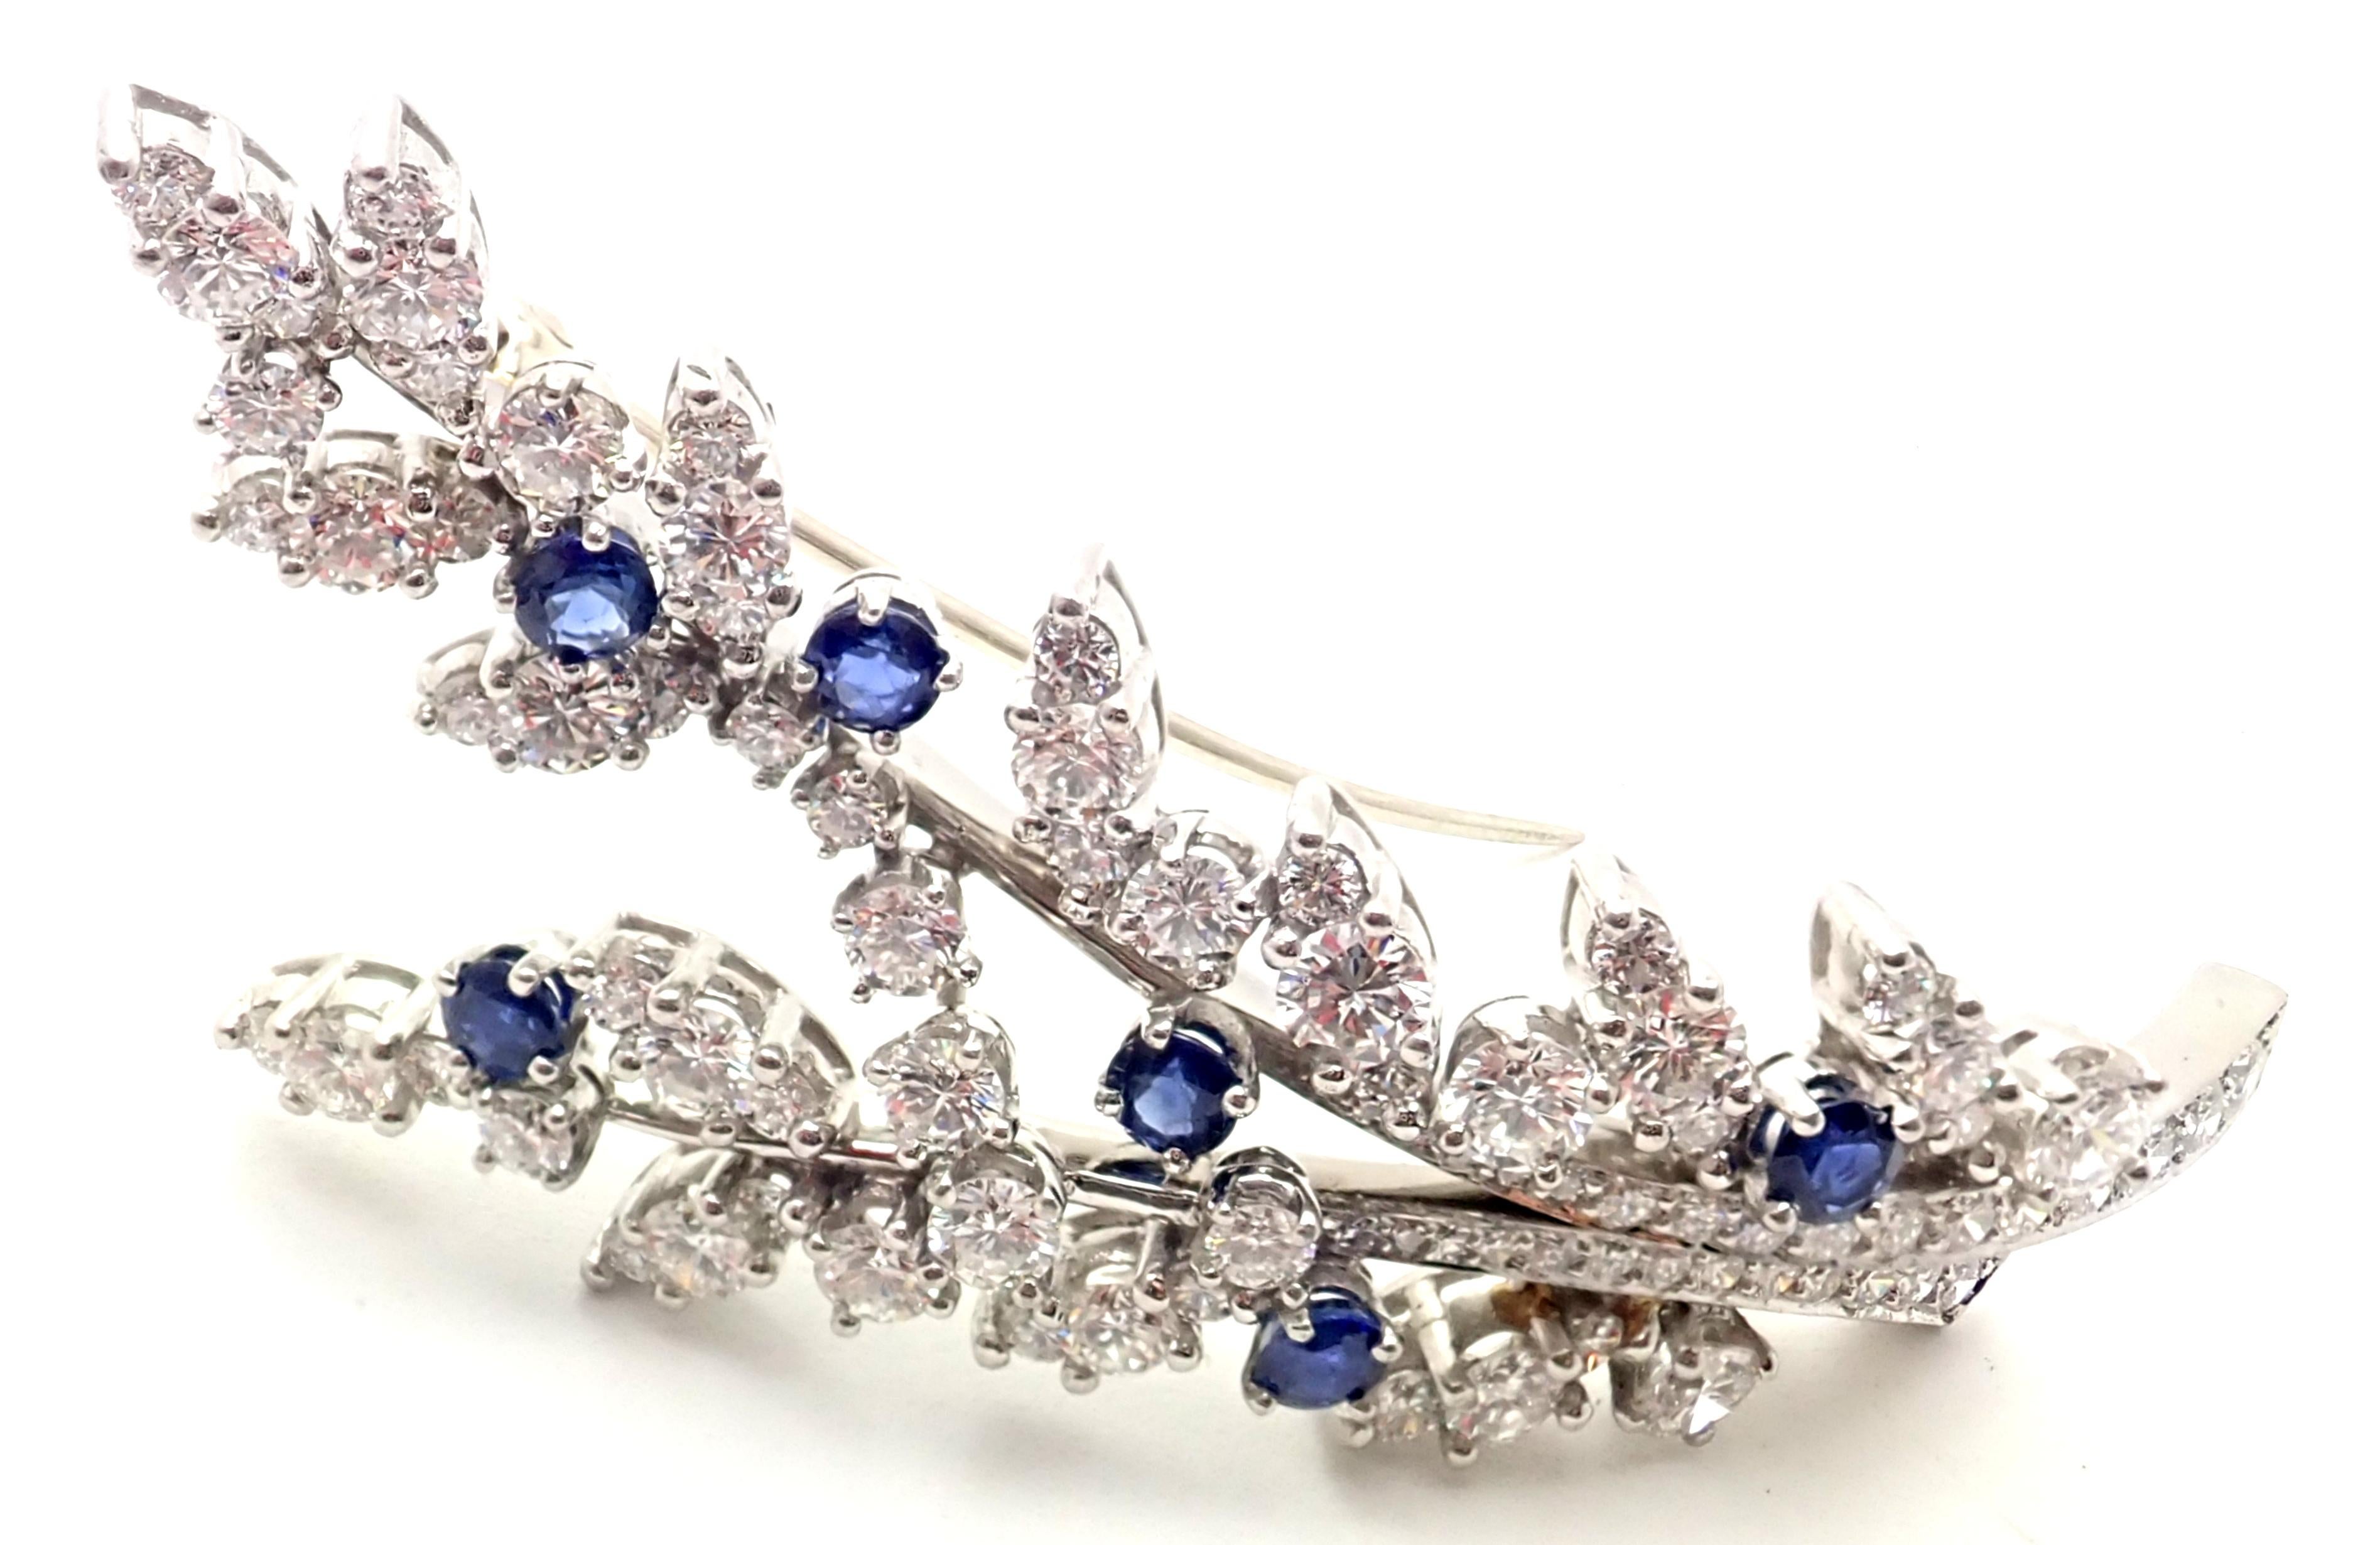 Vintage Platinum Diamond Sapphire Flower Pin Brooch by Tiffany & Co.
With 85 Round brilliant cut diamonds VS1 clarity, G color total weight approx. 3.5ct
6 Round sapphires total weight approx. 1.25ct
Details:
Measurements: 2 1/4